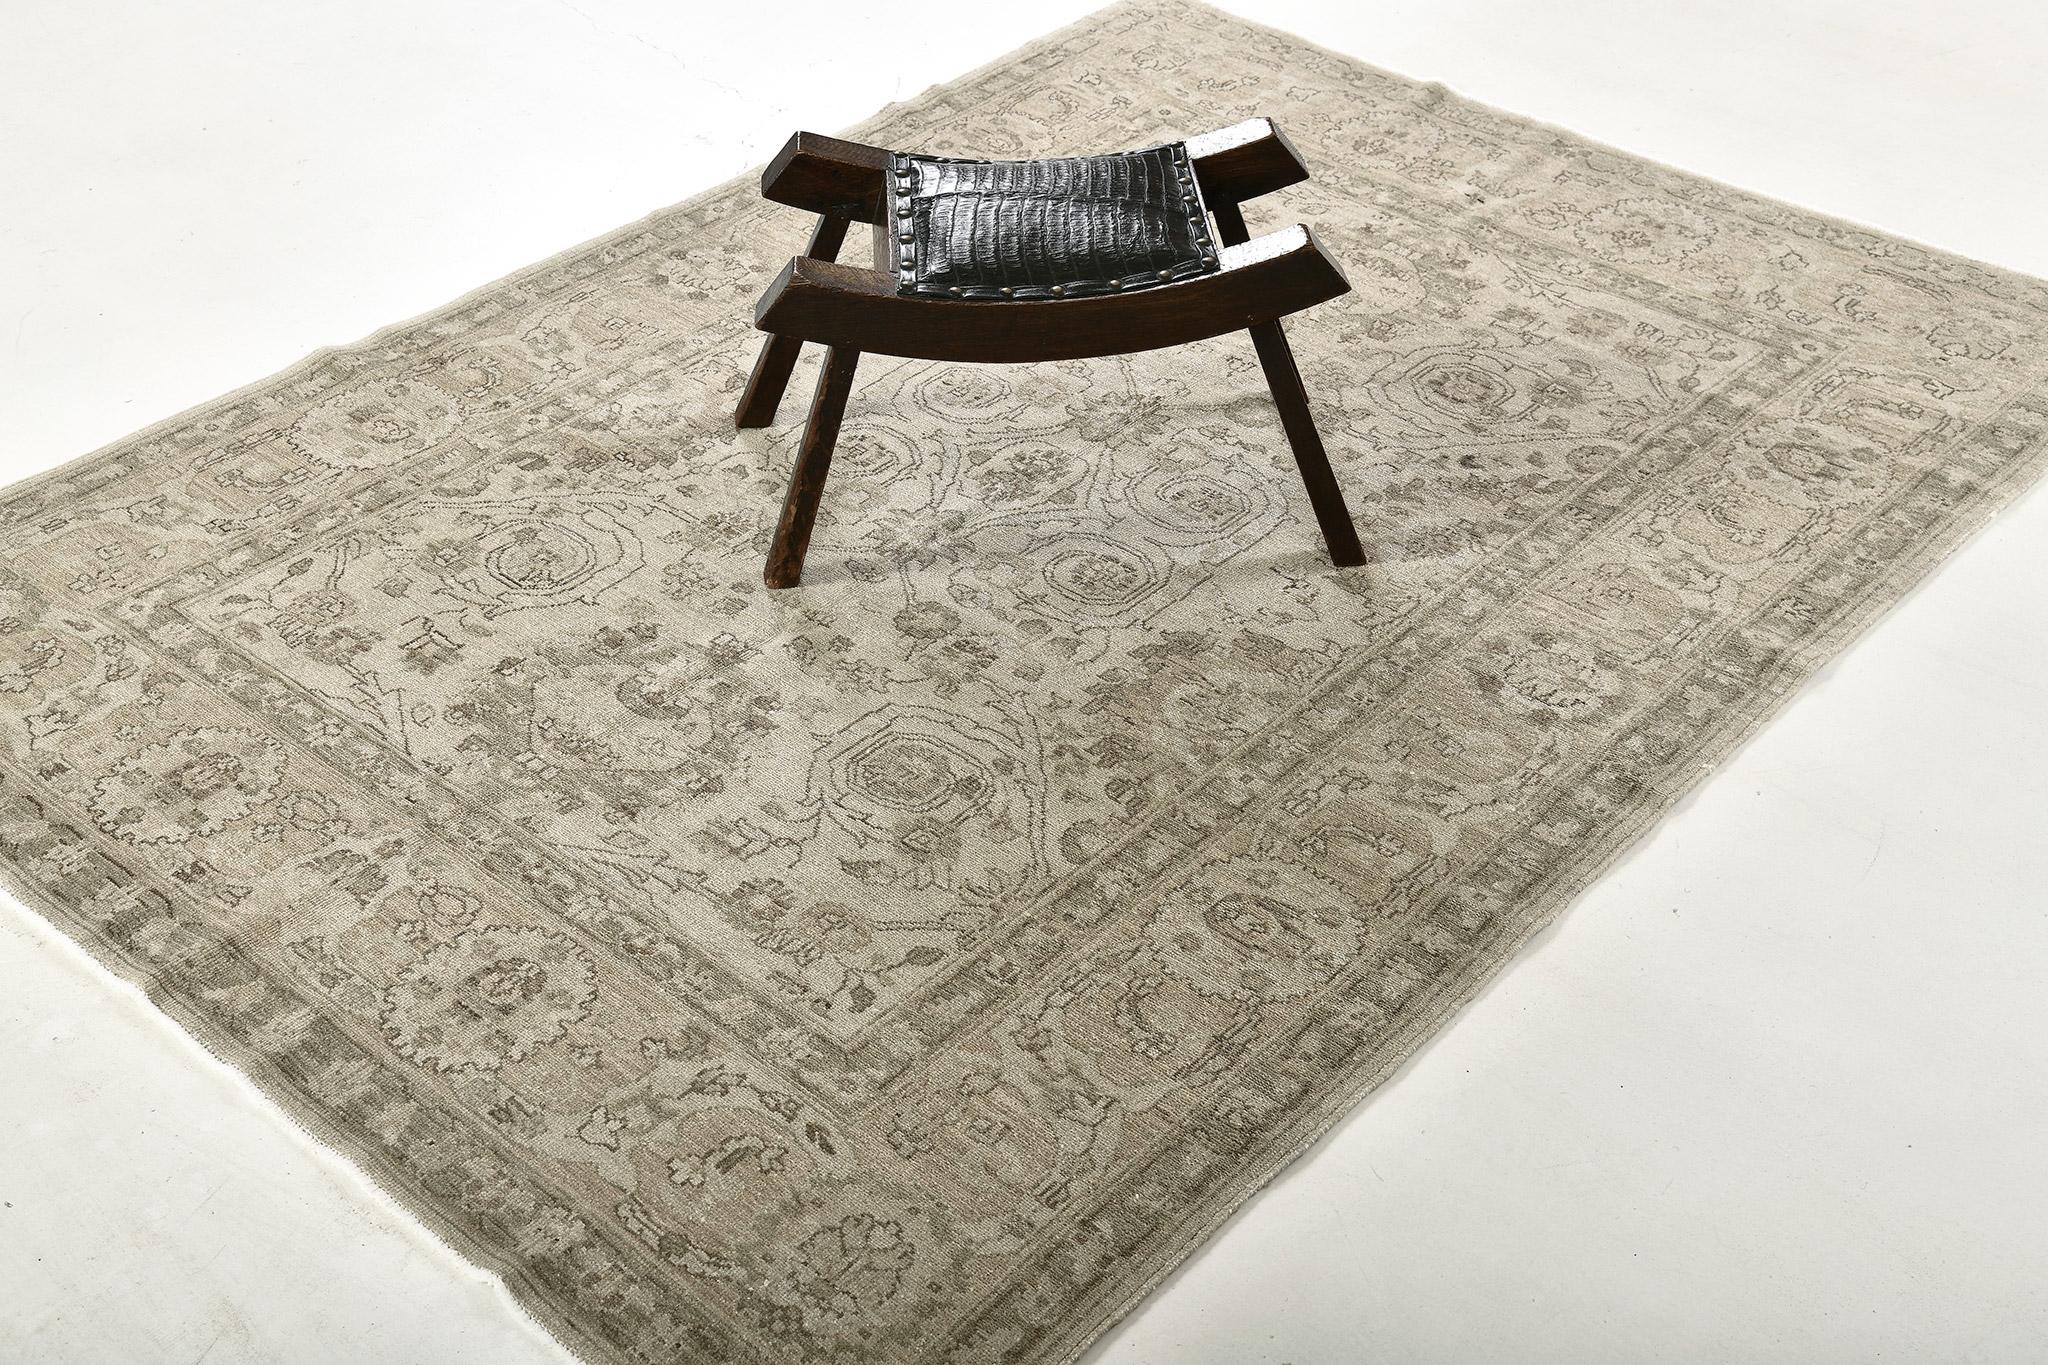 This exquisite Mahal Mostofi revival rug encompassing the patterns that express the sophistication and colors that can be seen. This results in a wonderfully balanced look and feel. The scaled and neutral-colored tone will make a magnificent